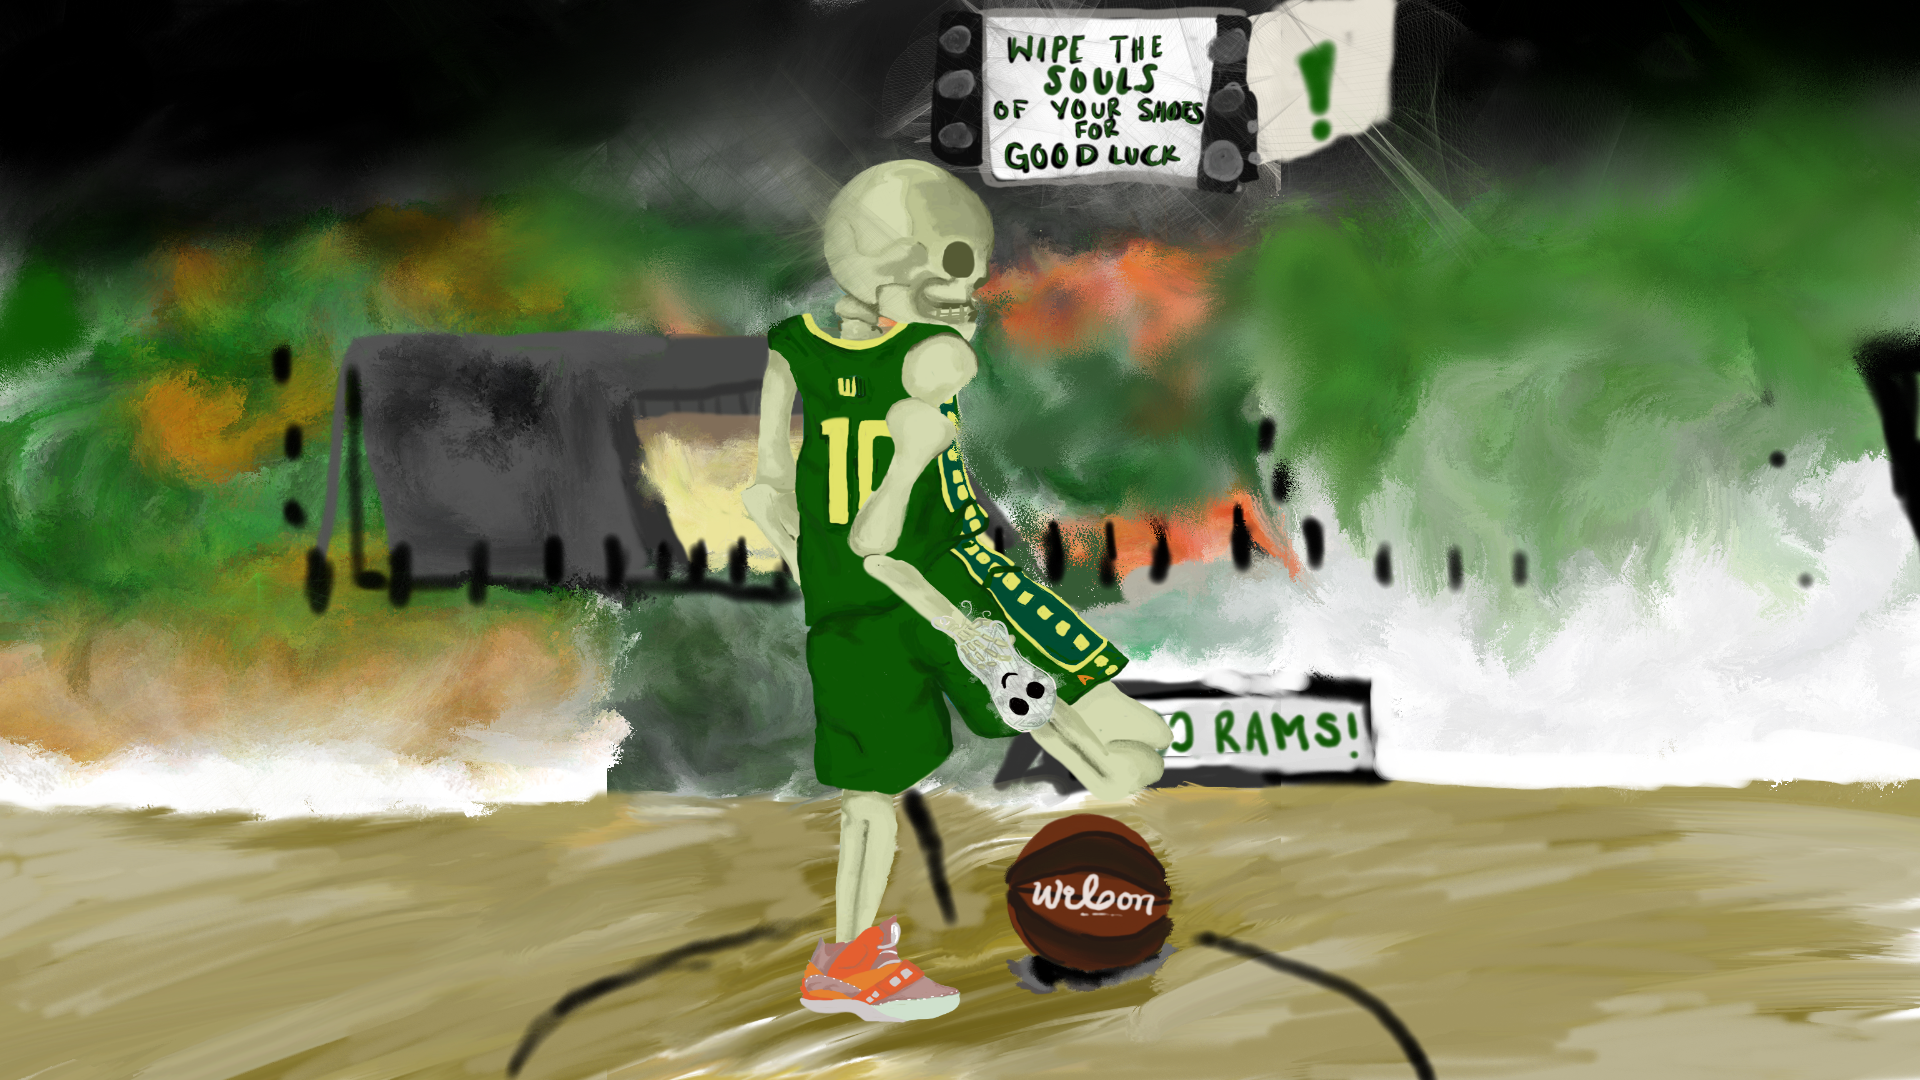 Skeleton basketball player wiping the sole of his shoe for good luch